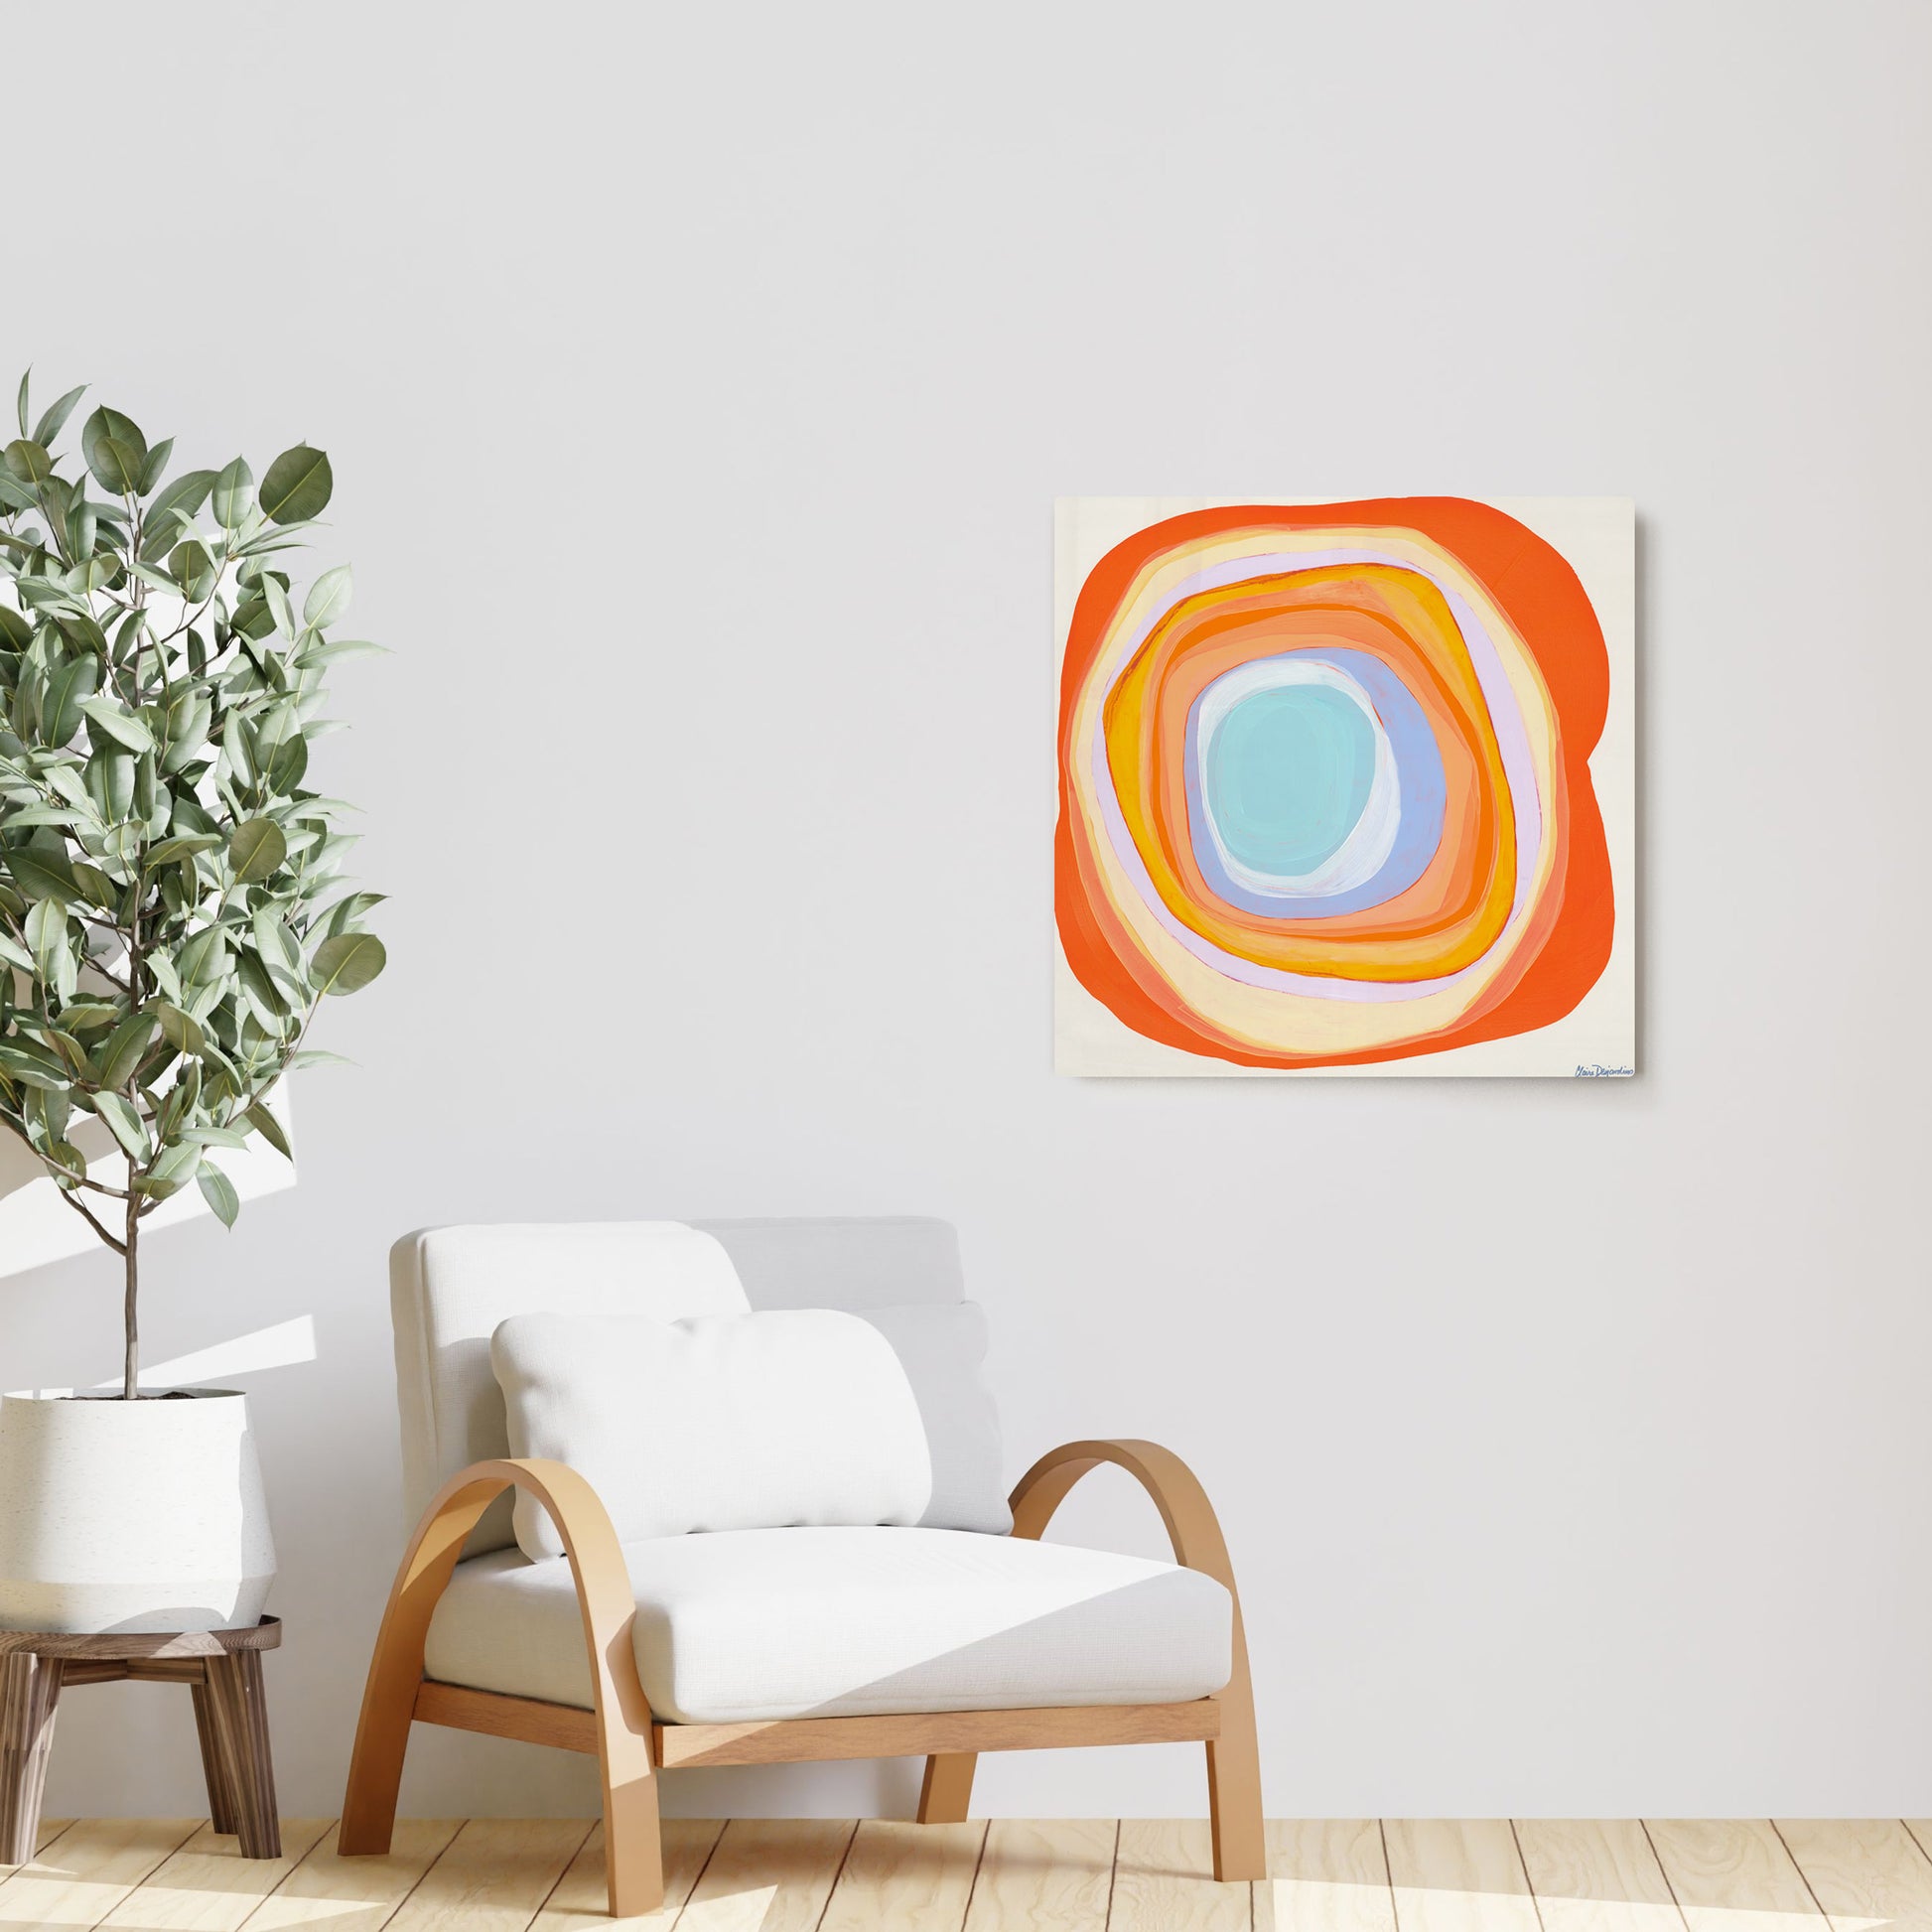 Claire Desjardins' Orange Slice painting reproduced on HD metal print and displayed on wall